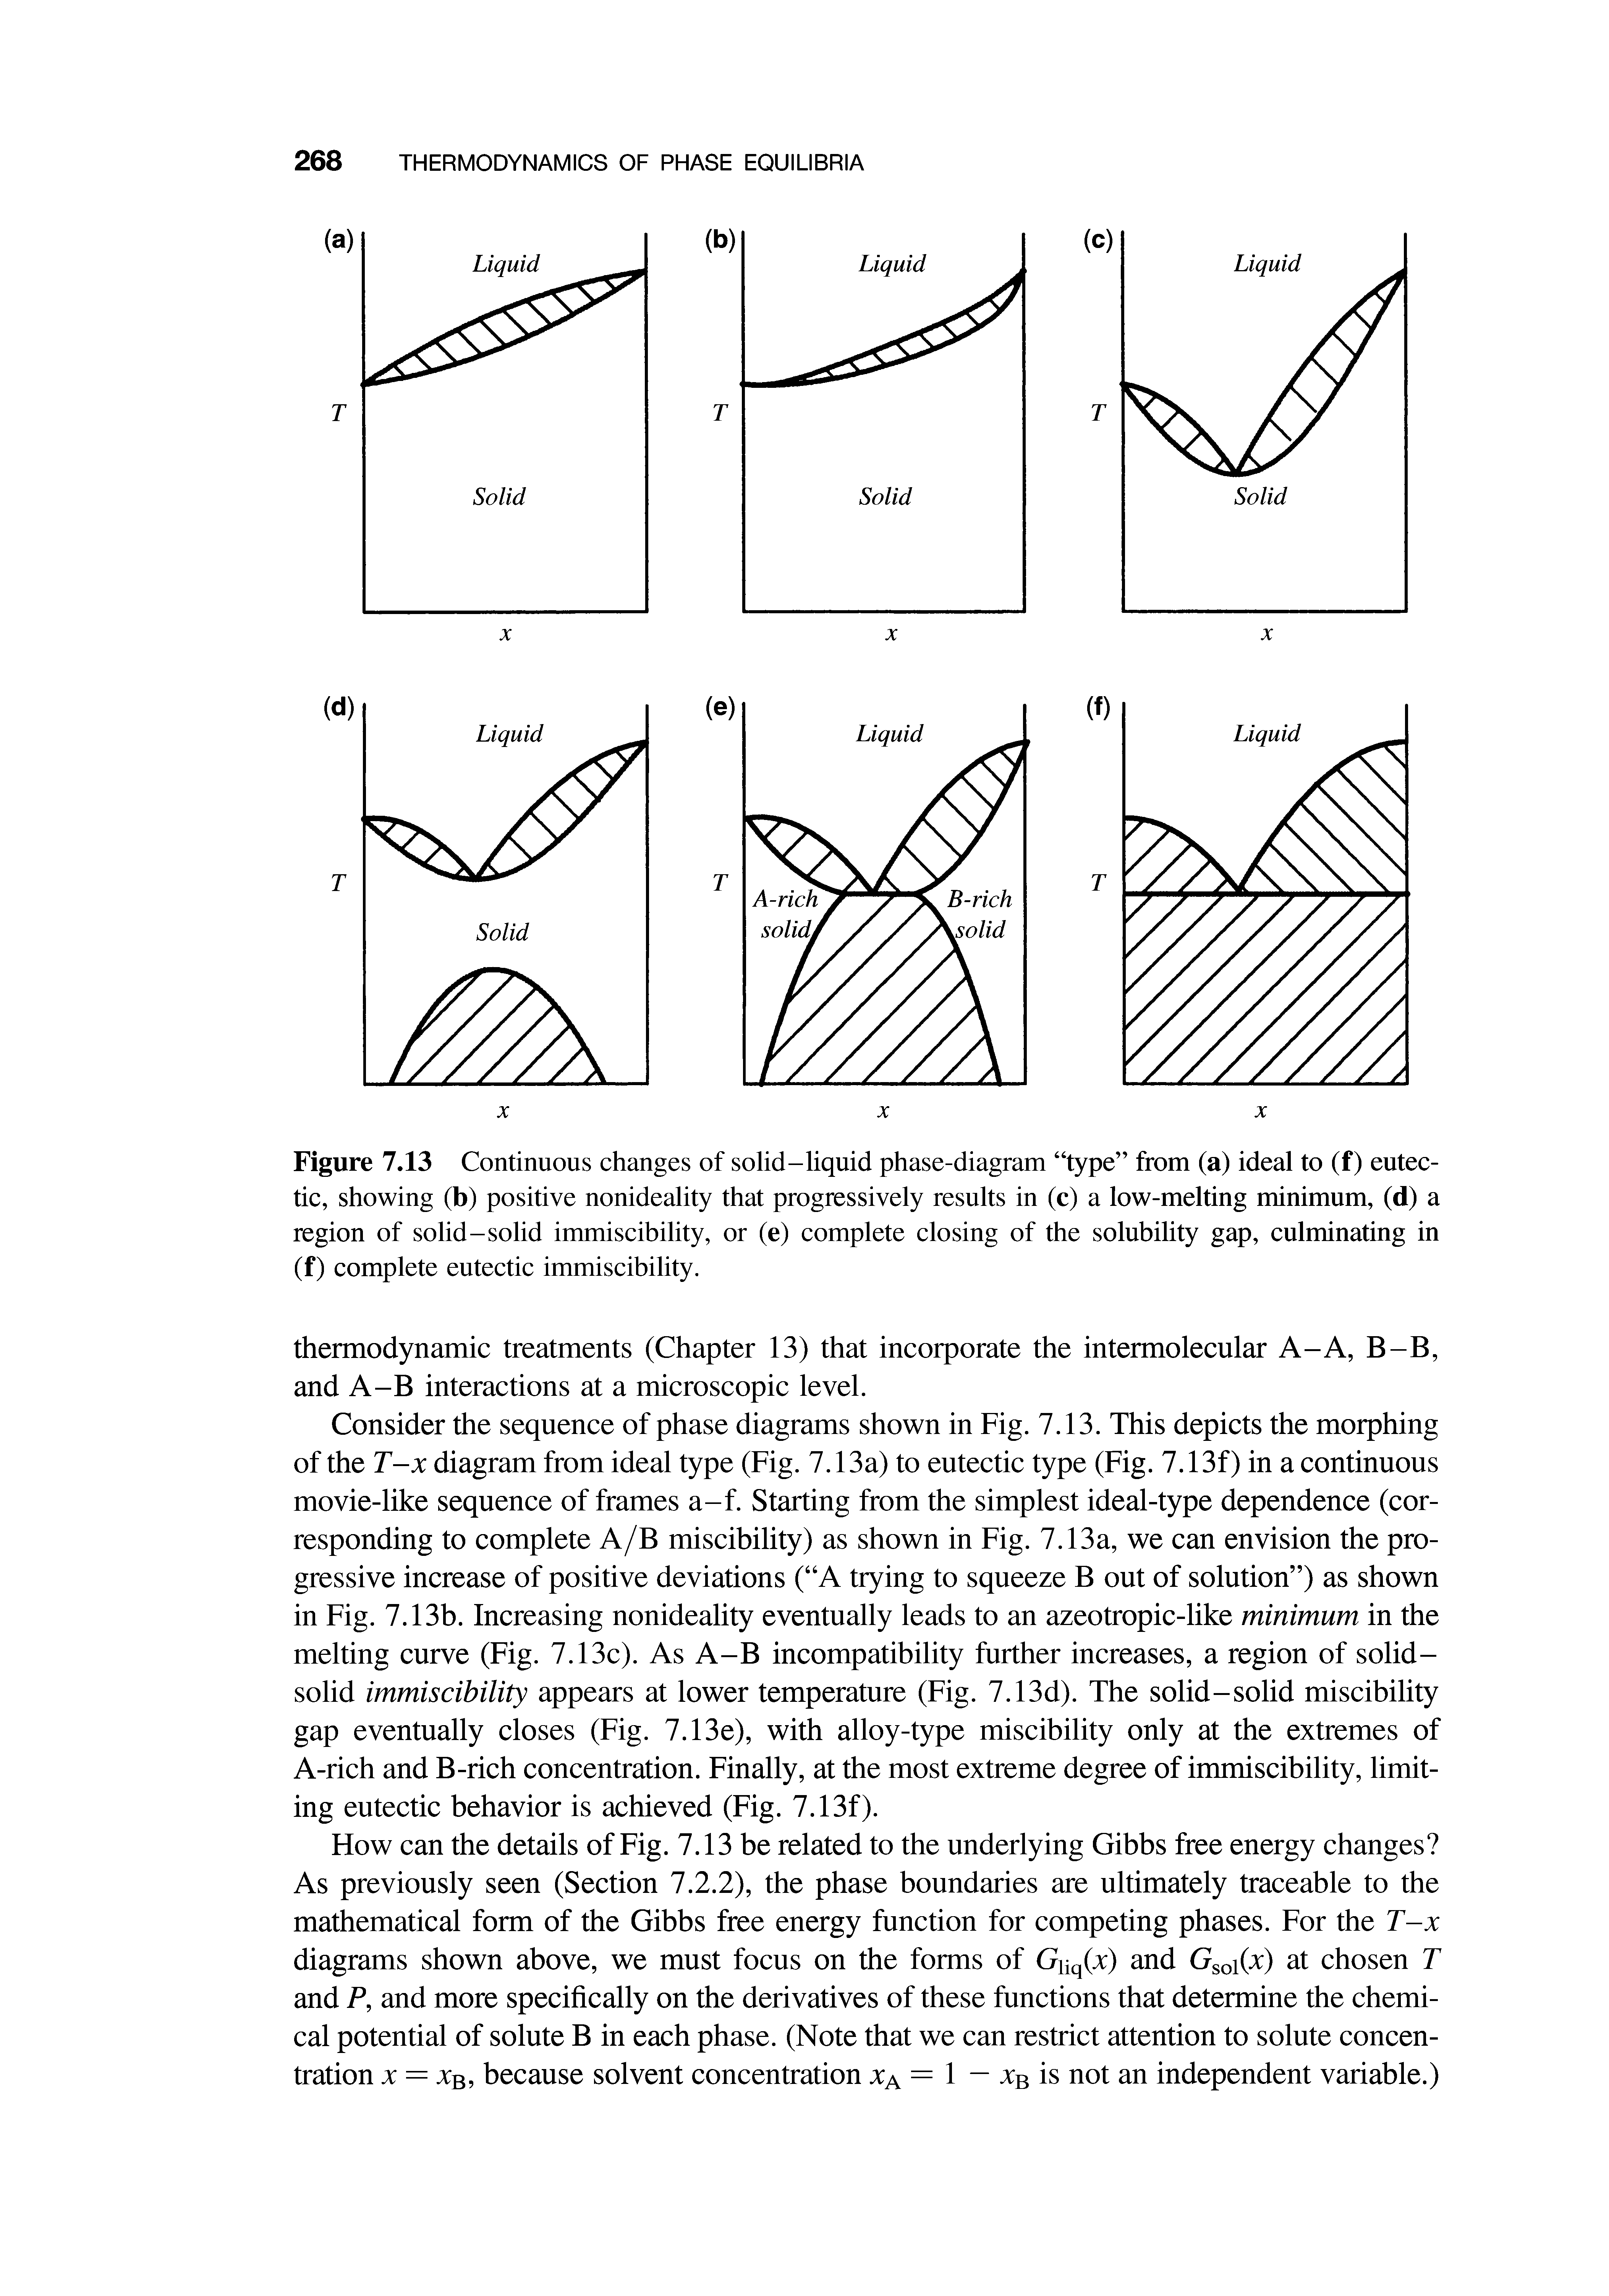 Figure 7.13 Continuous changes of solid-liquid phase-diagram type from (a) ideal to (f) eutectic, showing (b) positive nonideality that progressively results in (c) a low-melting minimum, (d) a region of solid-solid immiscibility, or (e) complete closing of the solubility gap, culminating in (f) complete eutectic immiscibility.